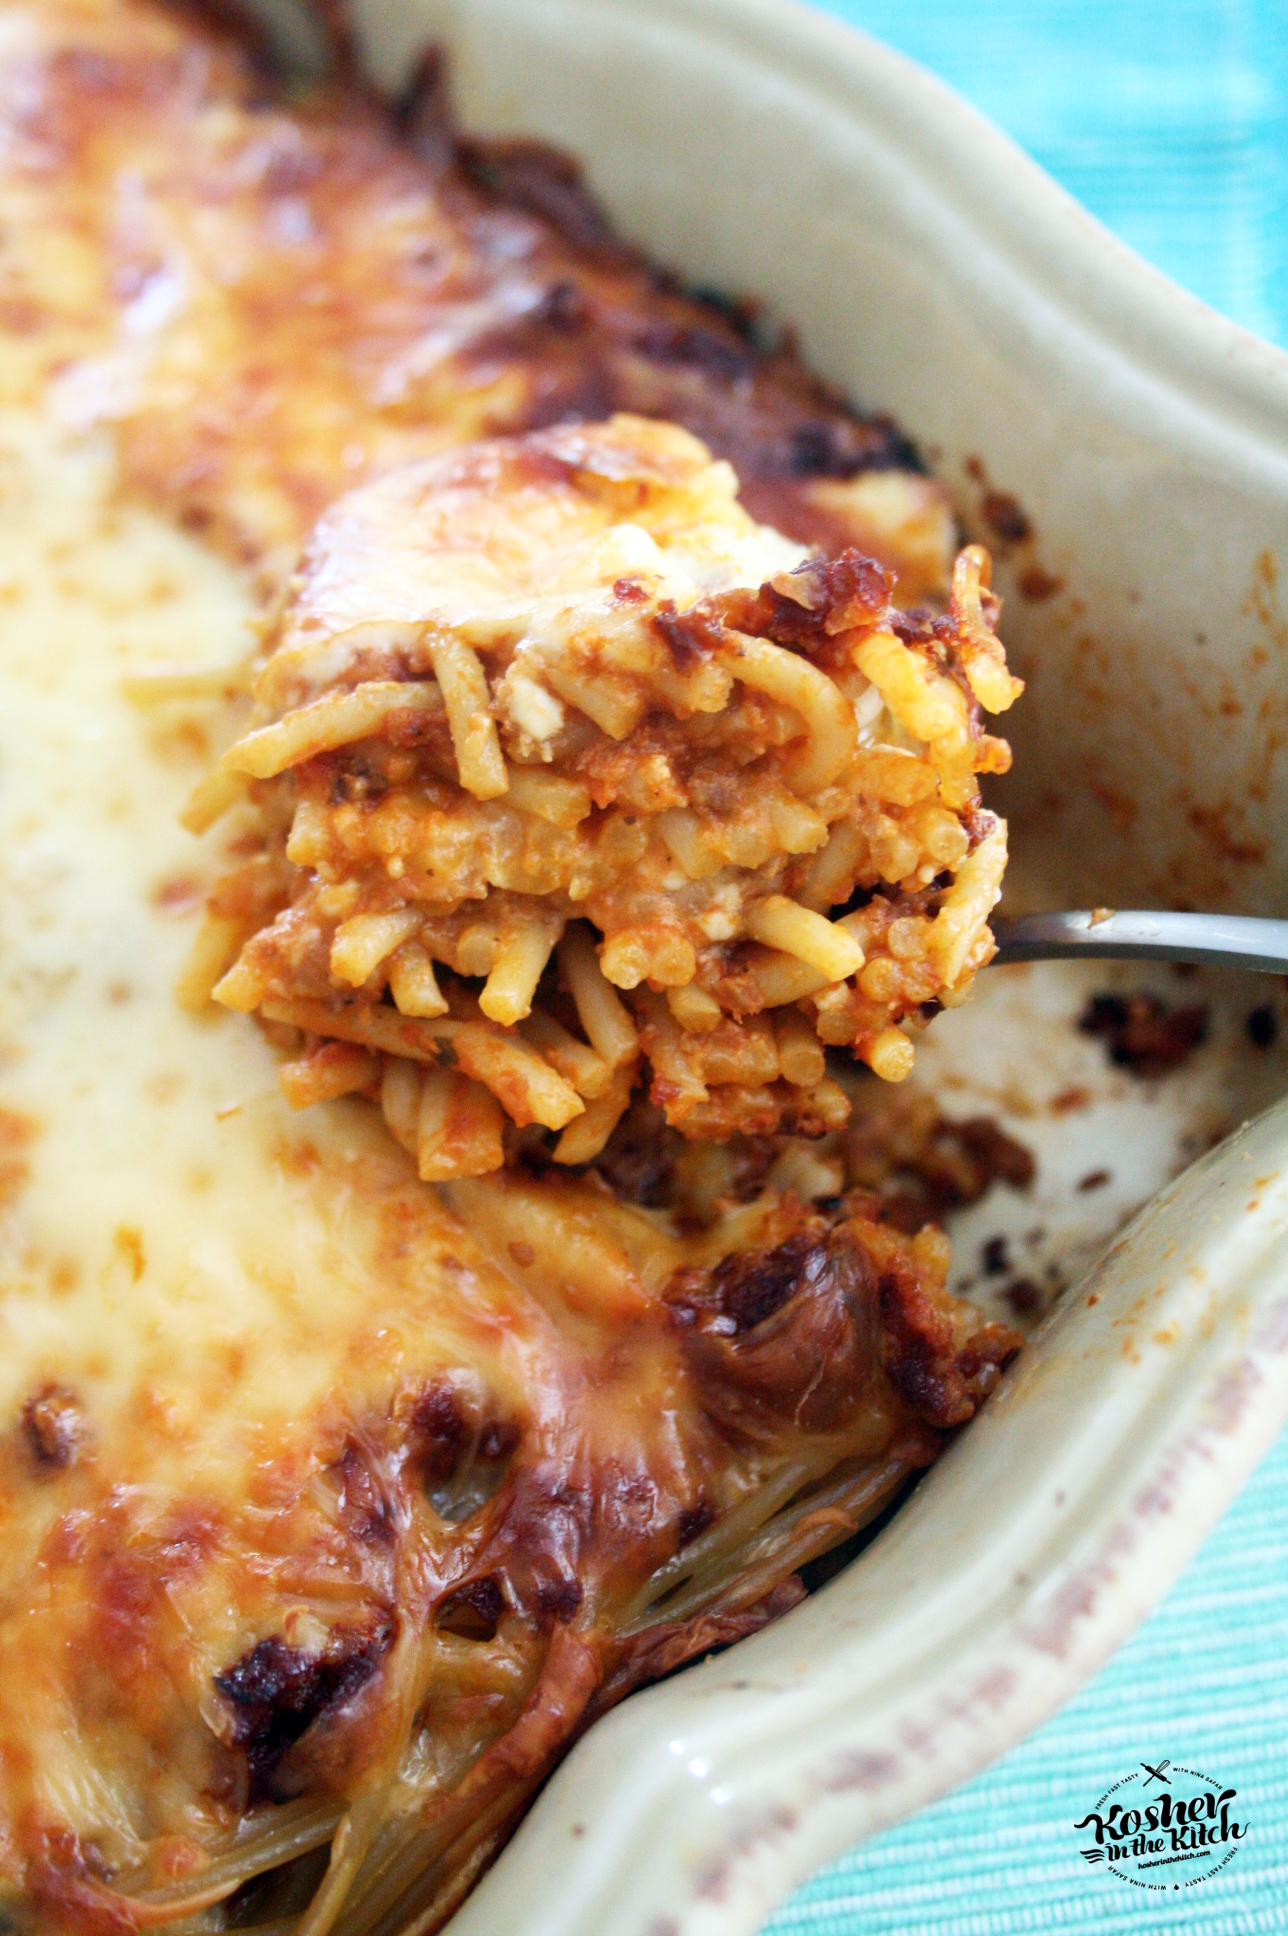 Baked Spaghetti with "Meat Sauce"